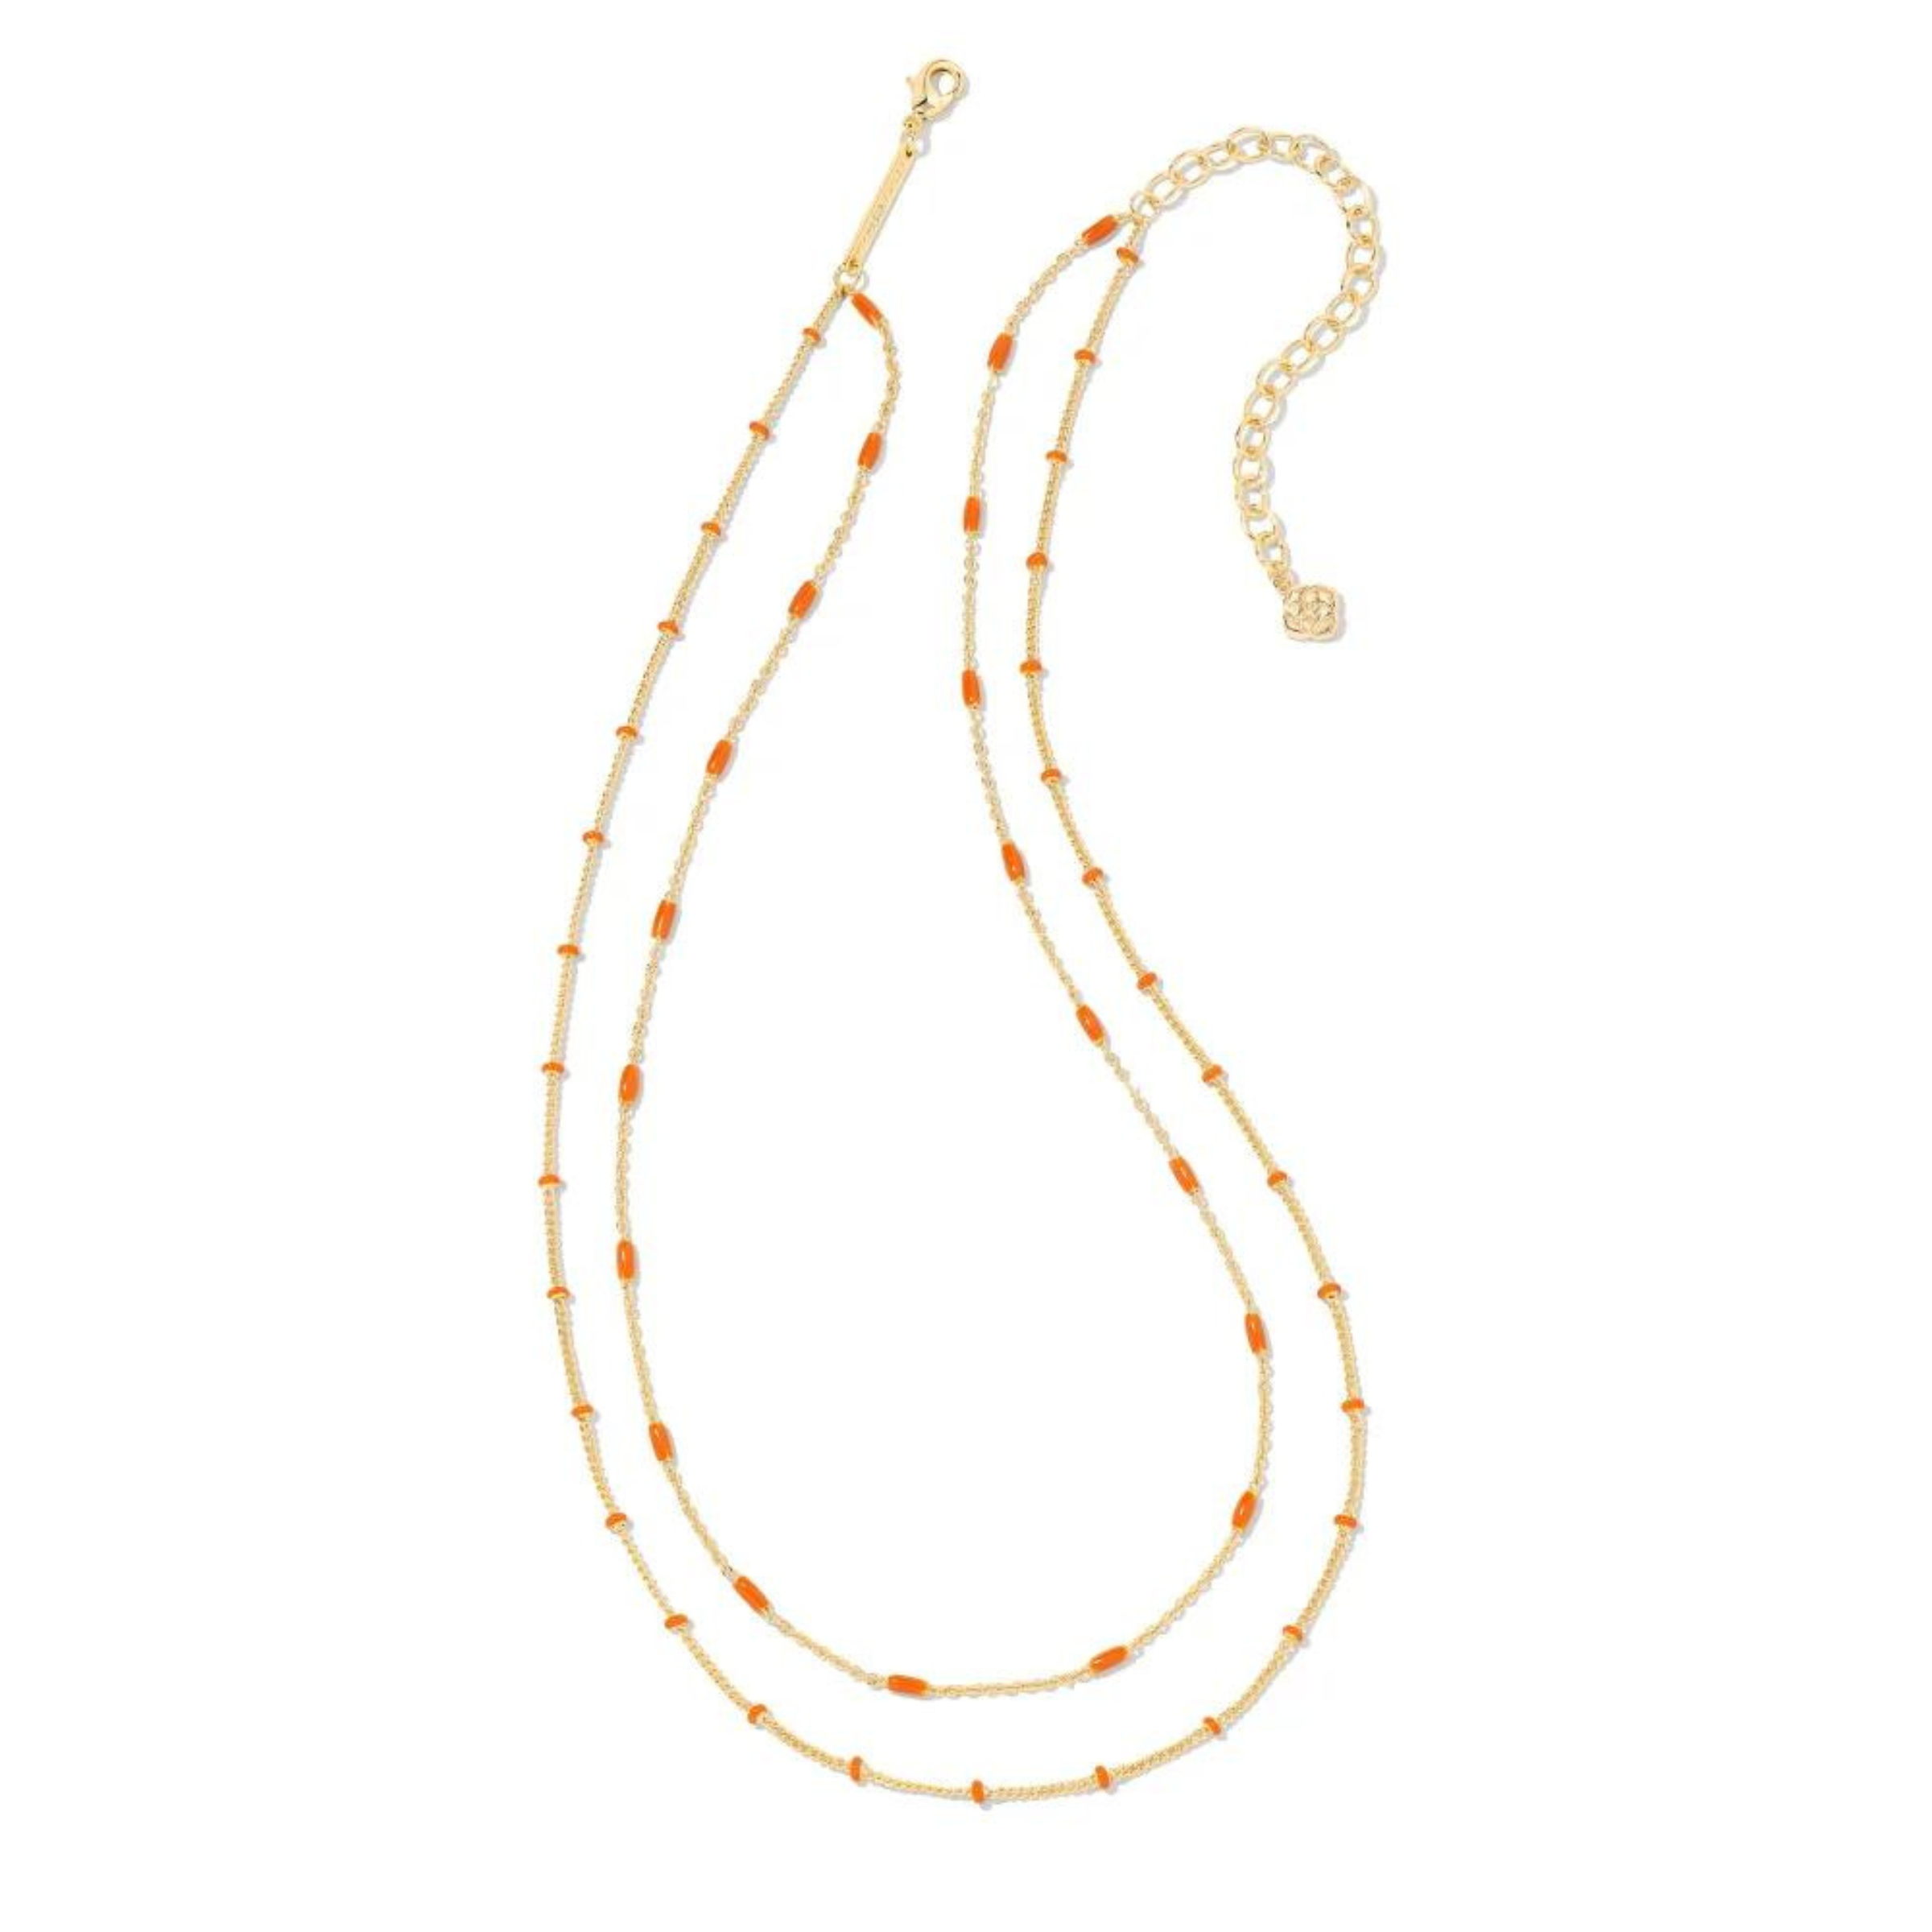 Two strand, adjustable chain necklace with orange enamel spacers. This necklace is pictured on a white background. 